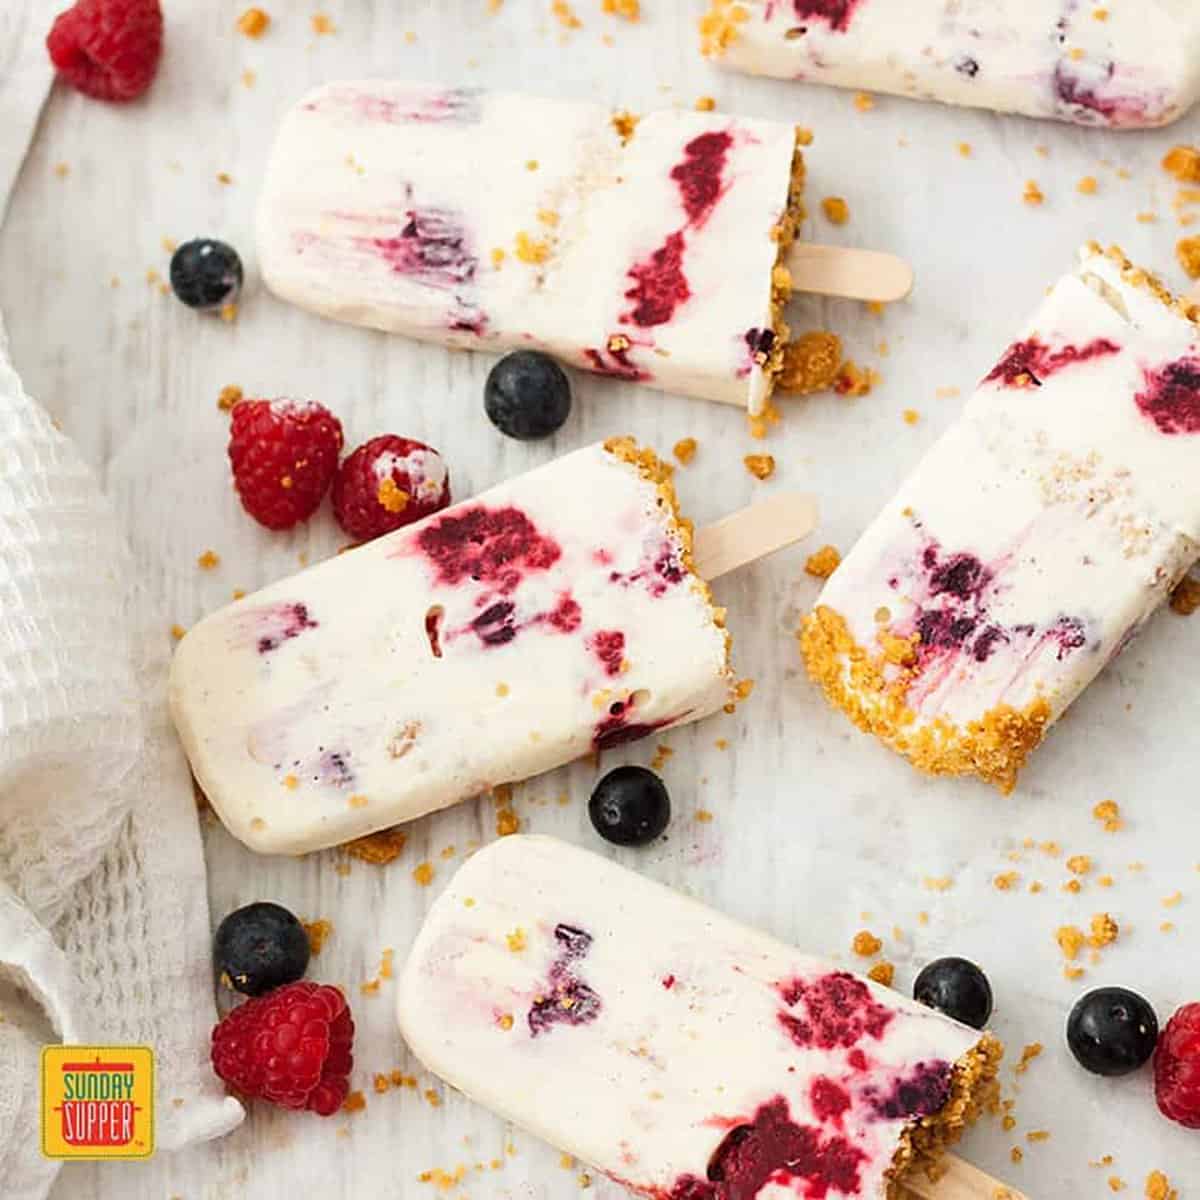 Frozen cheesecake popsicles with whole blueberries and raspberries on a white wood surface